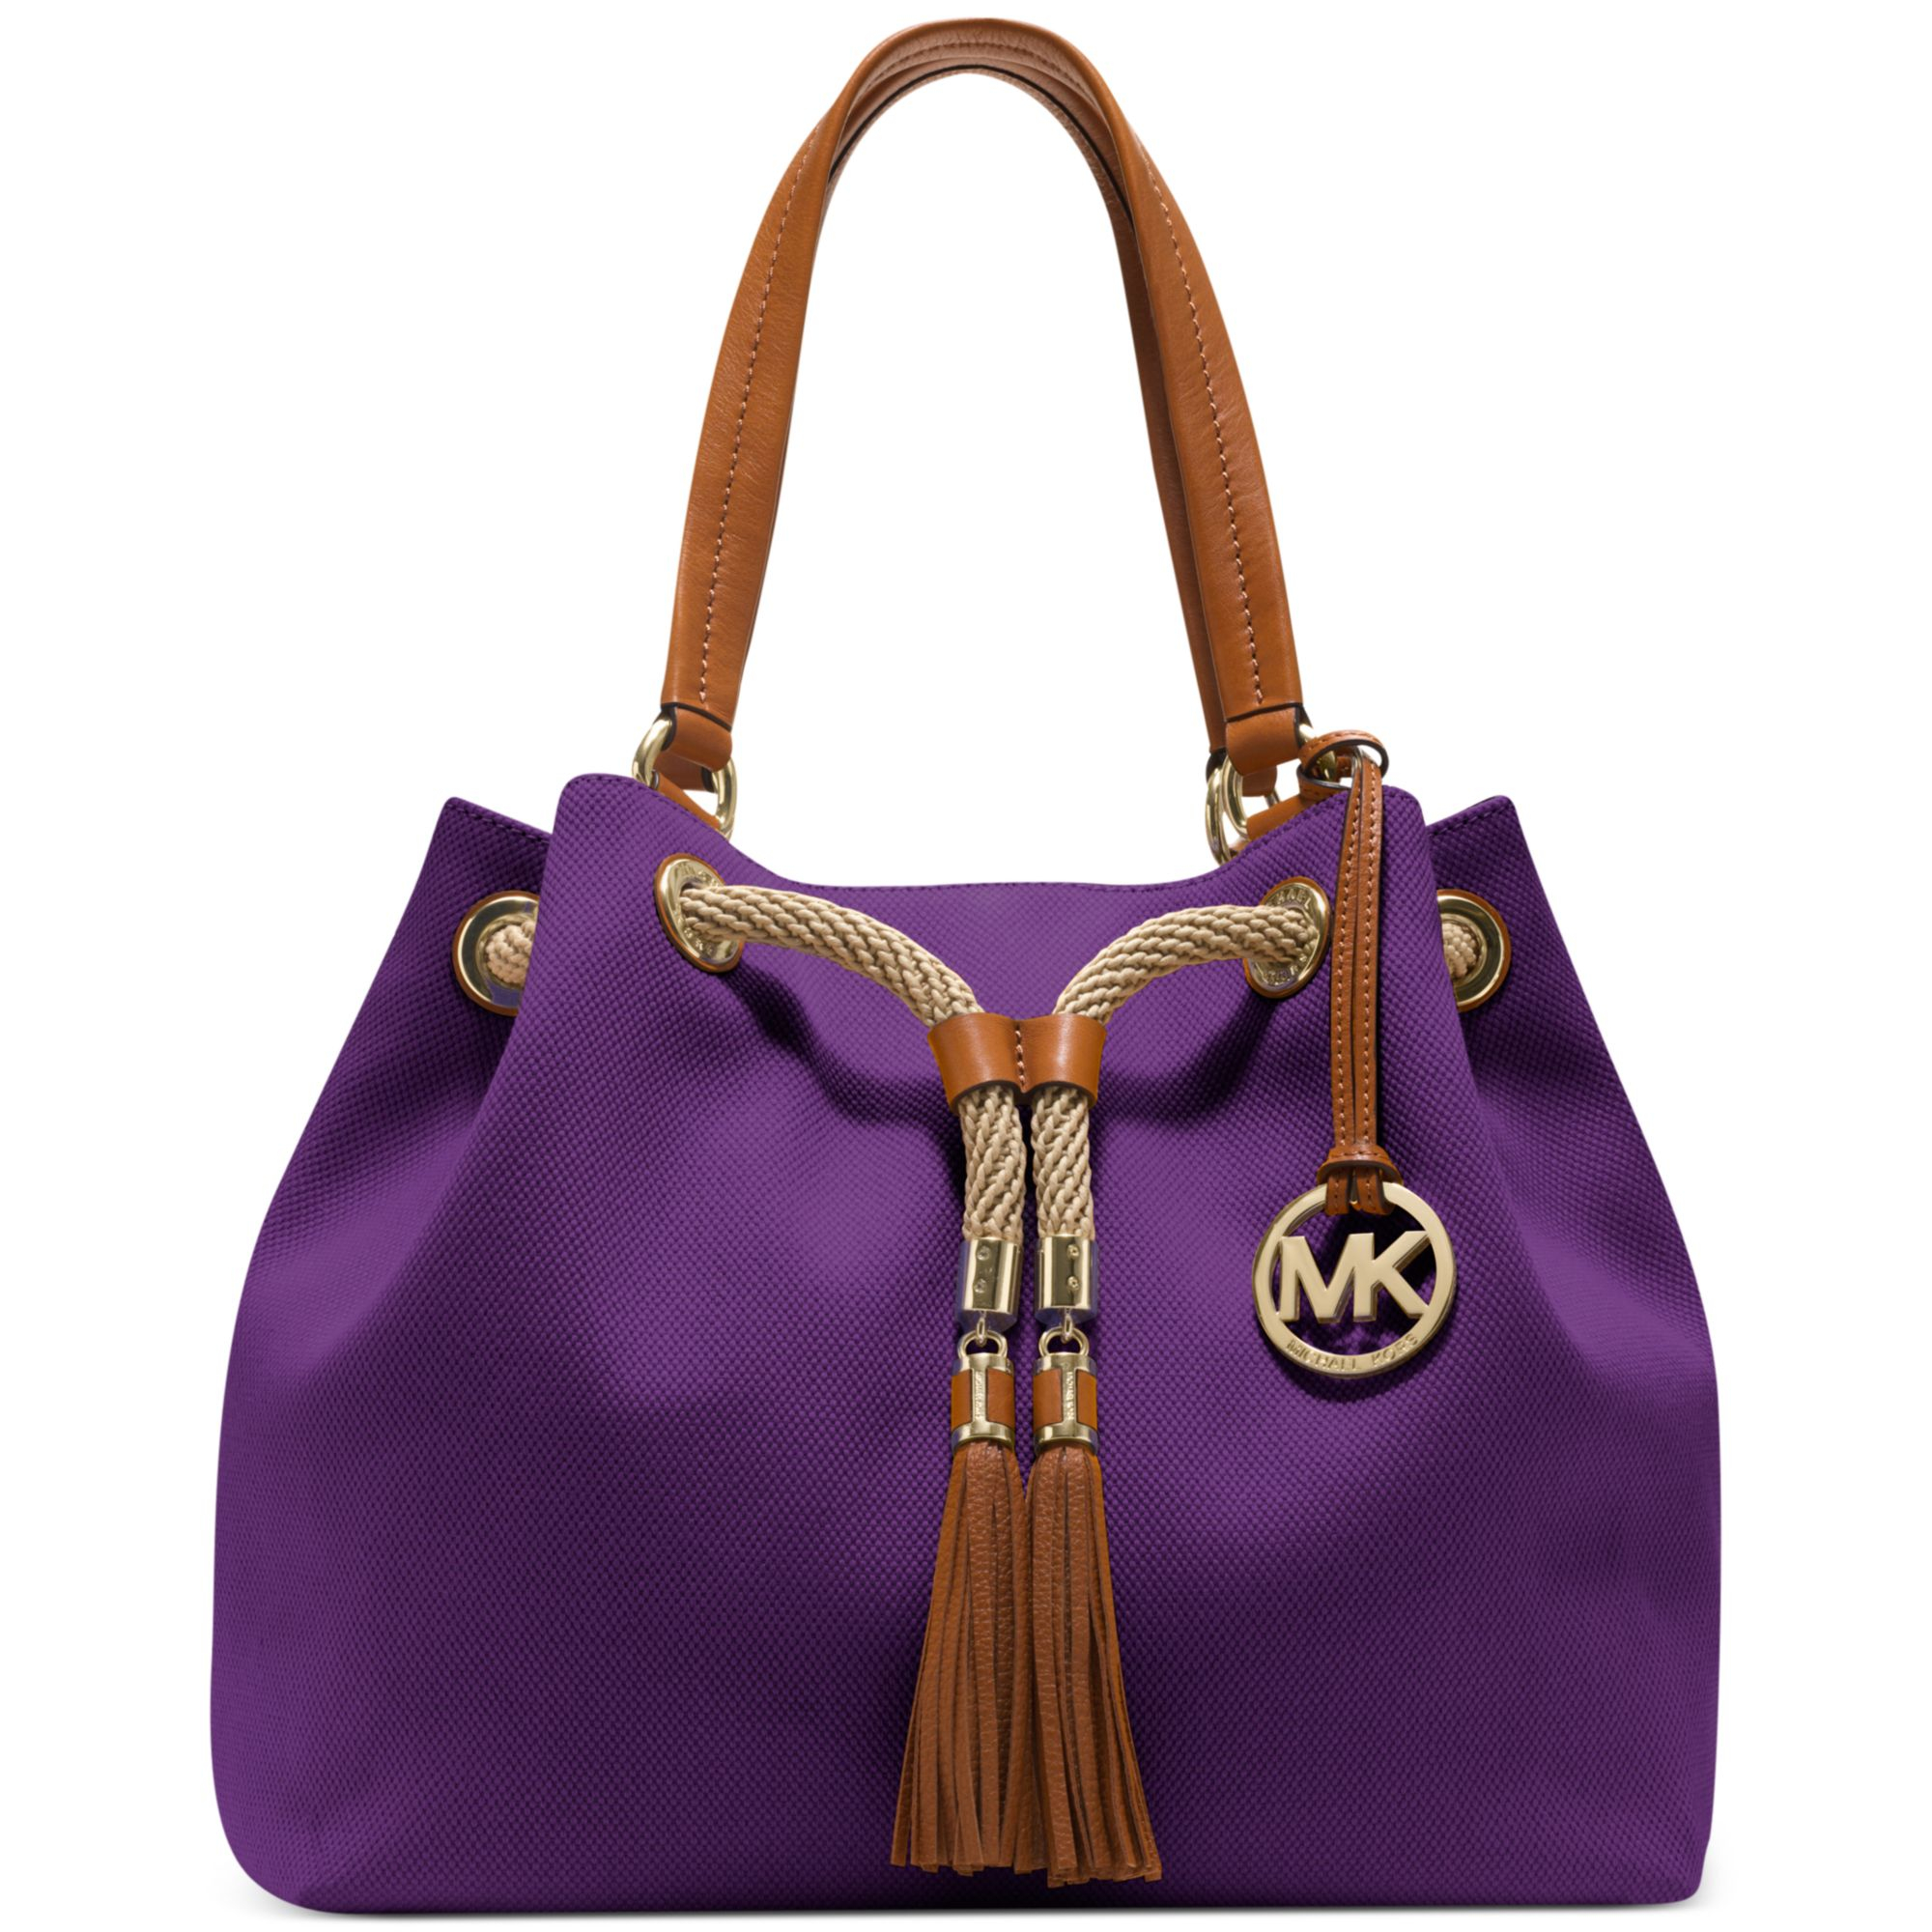 Michael Kors Marina Large Gathered Tote in Violet (Purple) - Lyst